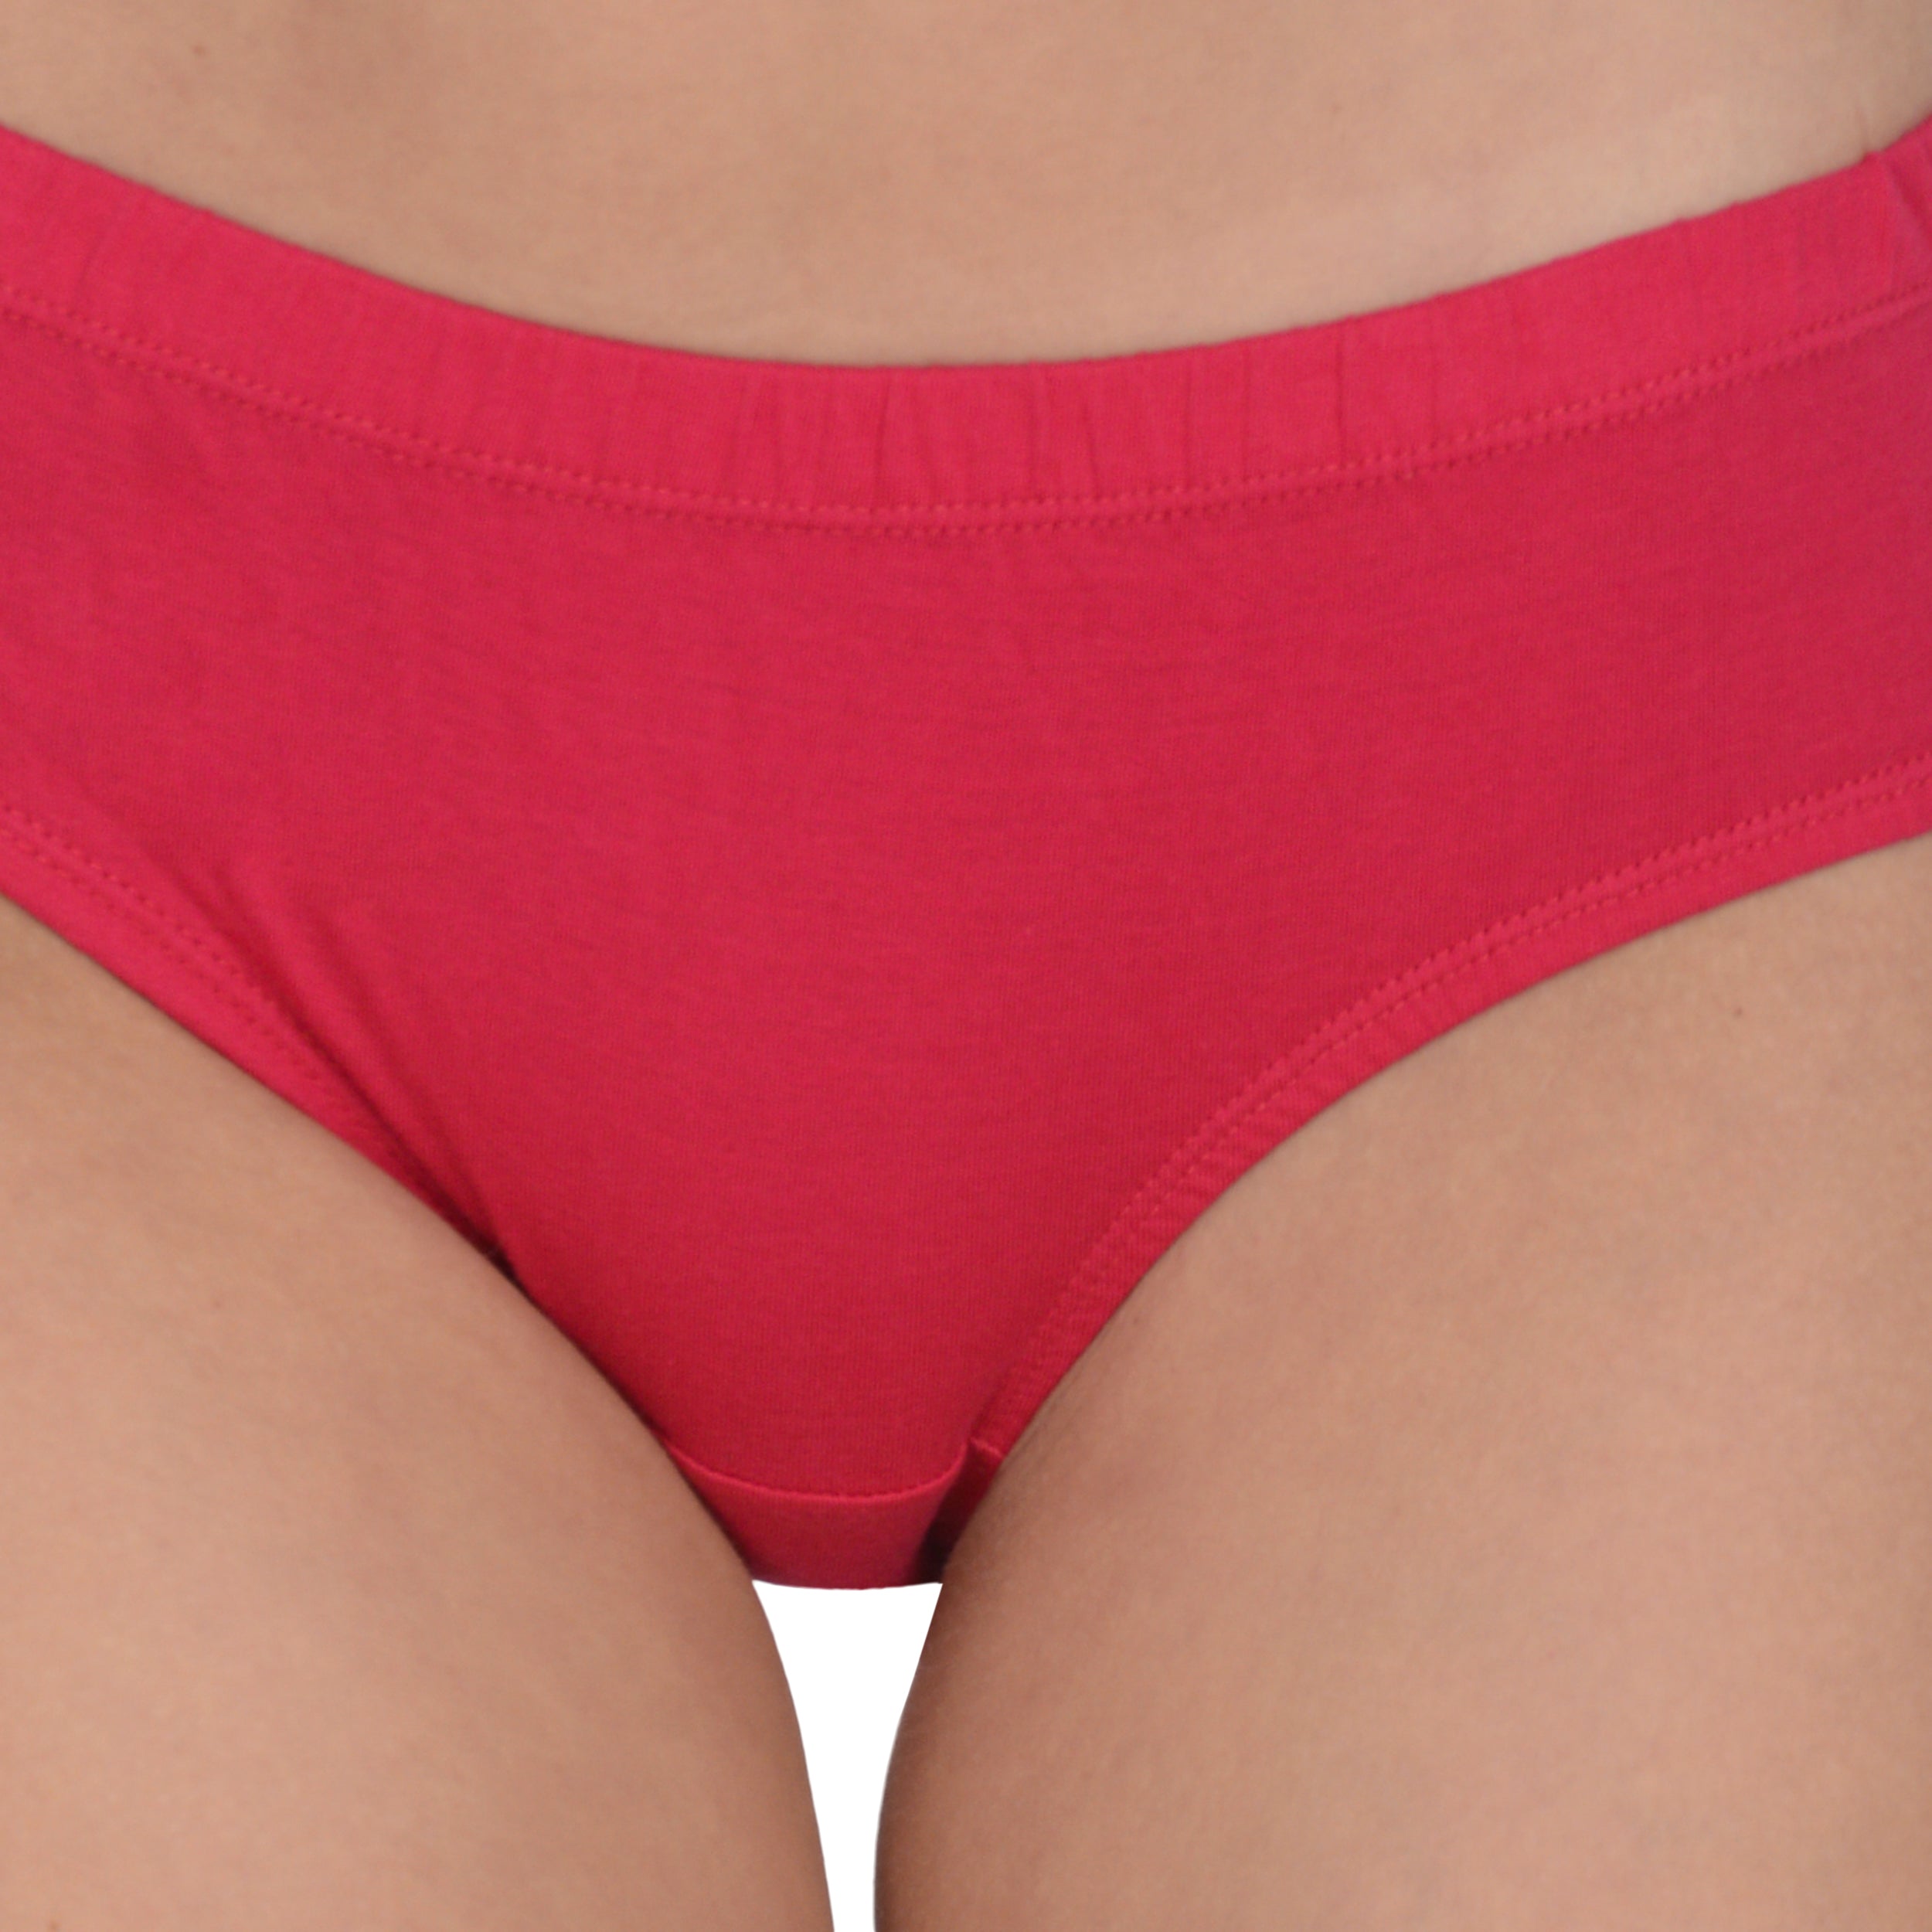 Printed Women''s Cotton Panties, Hipster Briefs at Rs 40/piece in